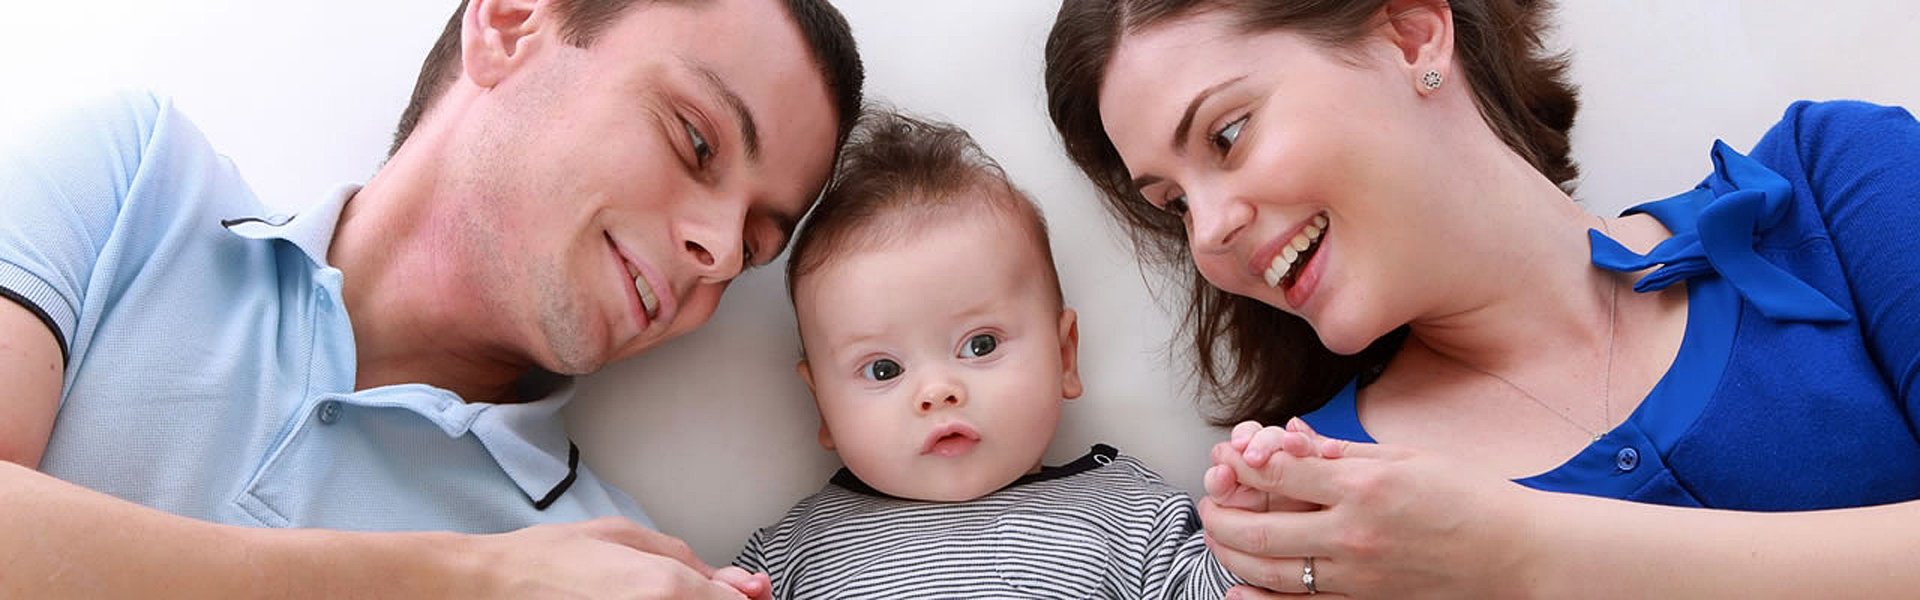 Mum, dad and baby | Benefits of Osteopathy at Holmwood Clinic